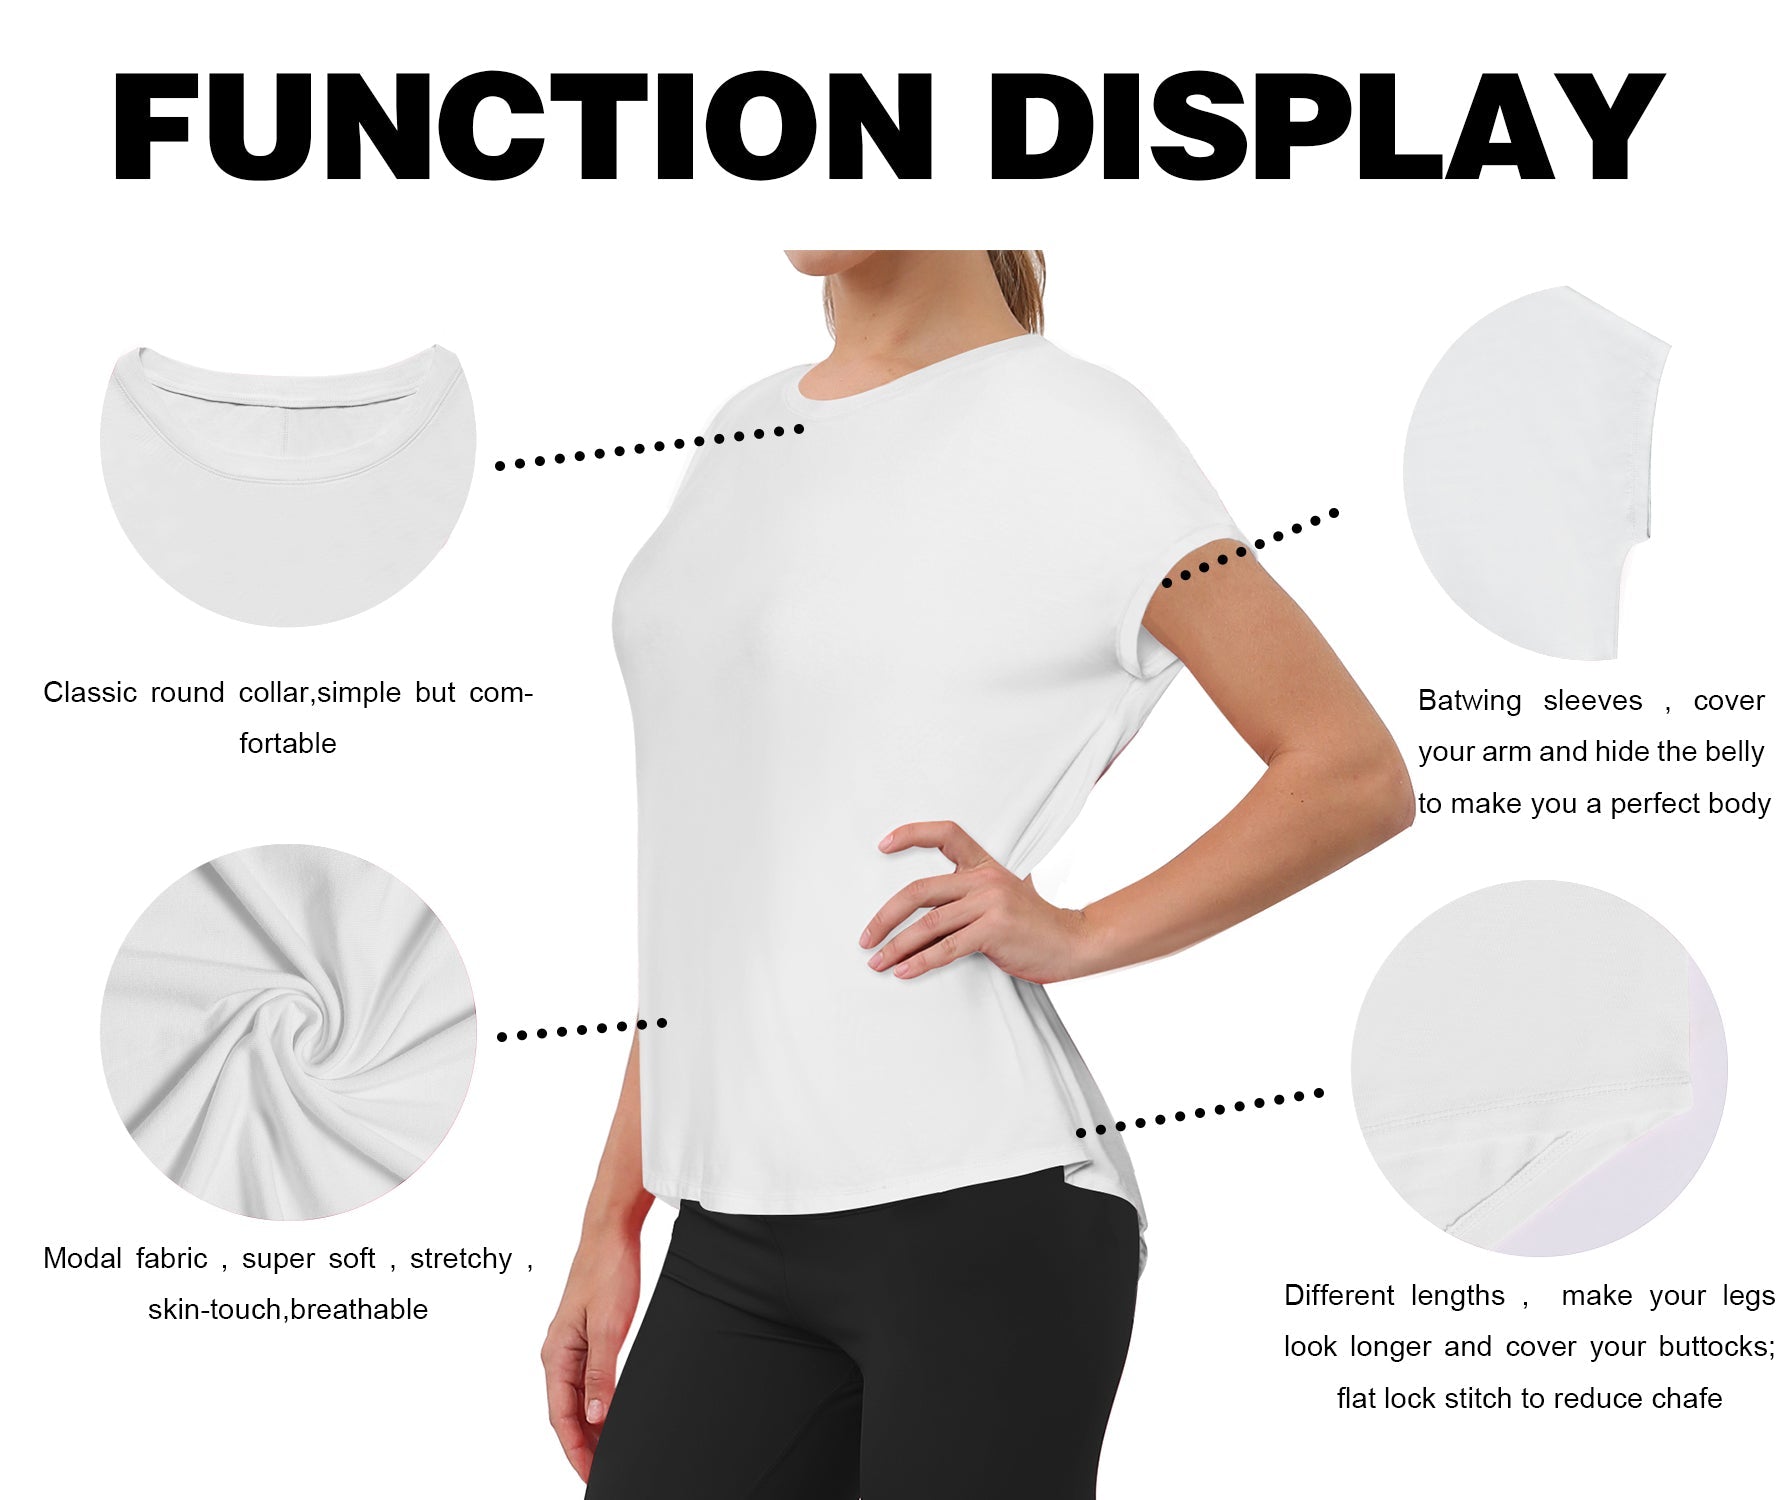 Hip Length Short Sleeve Shirt white 93%Modal/7%Spandex Designed for Pilates Classic Fit, Hip Length An easy fit that floats away from your body Sits below the waistband for moderate, everyday coverage Lightweight, elastic, strong fabric for moisture absorption and perspiration, sports and fitness clothing.